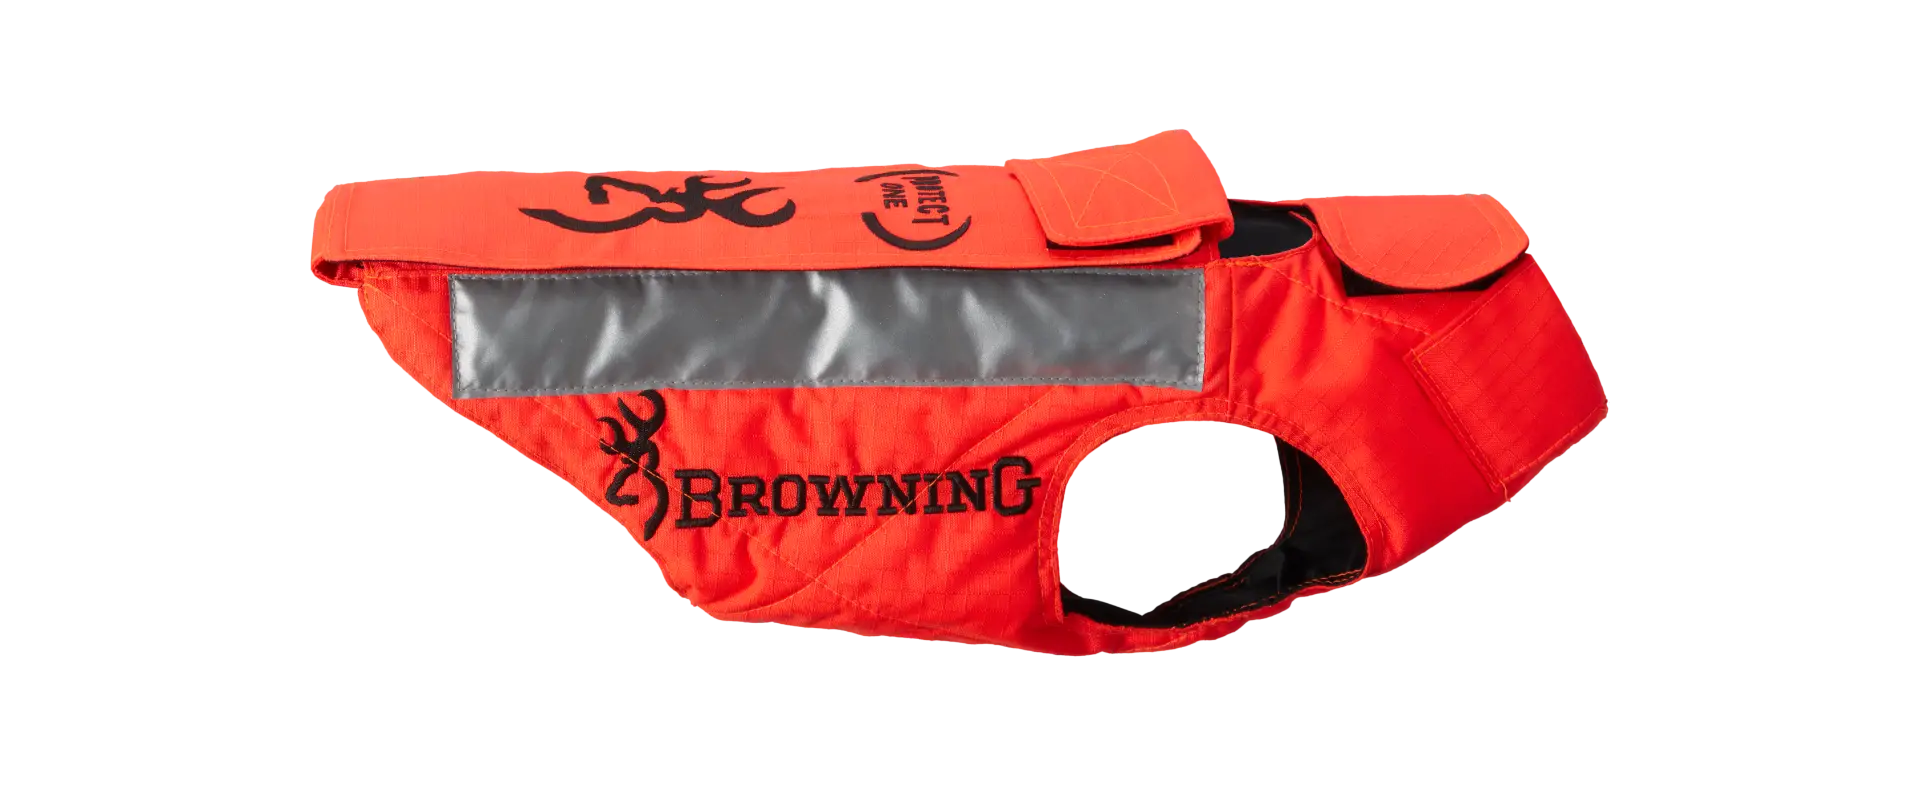 Gilet protection chien jaune protect pro EVO Browning Gen.3